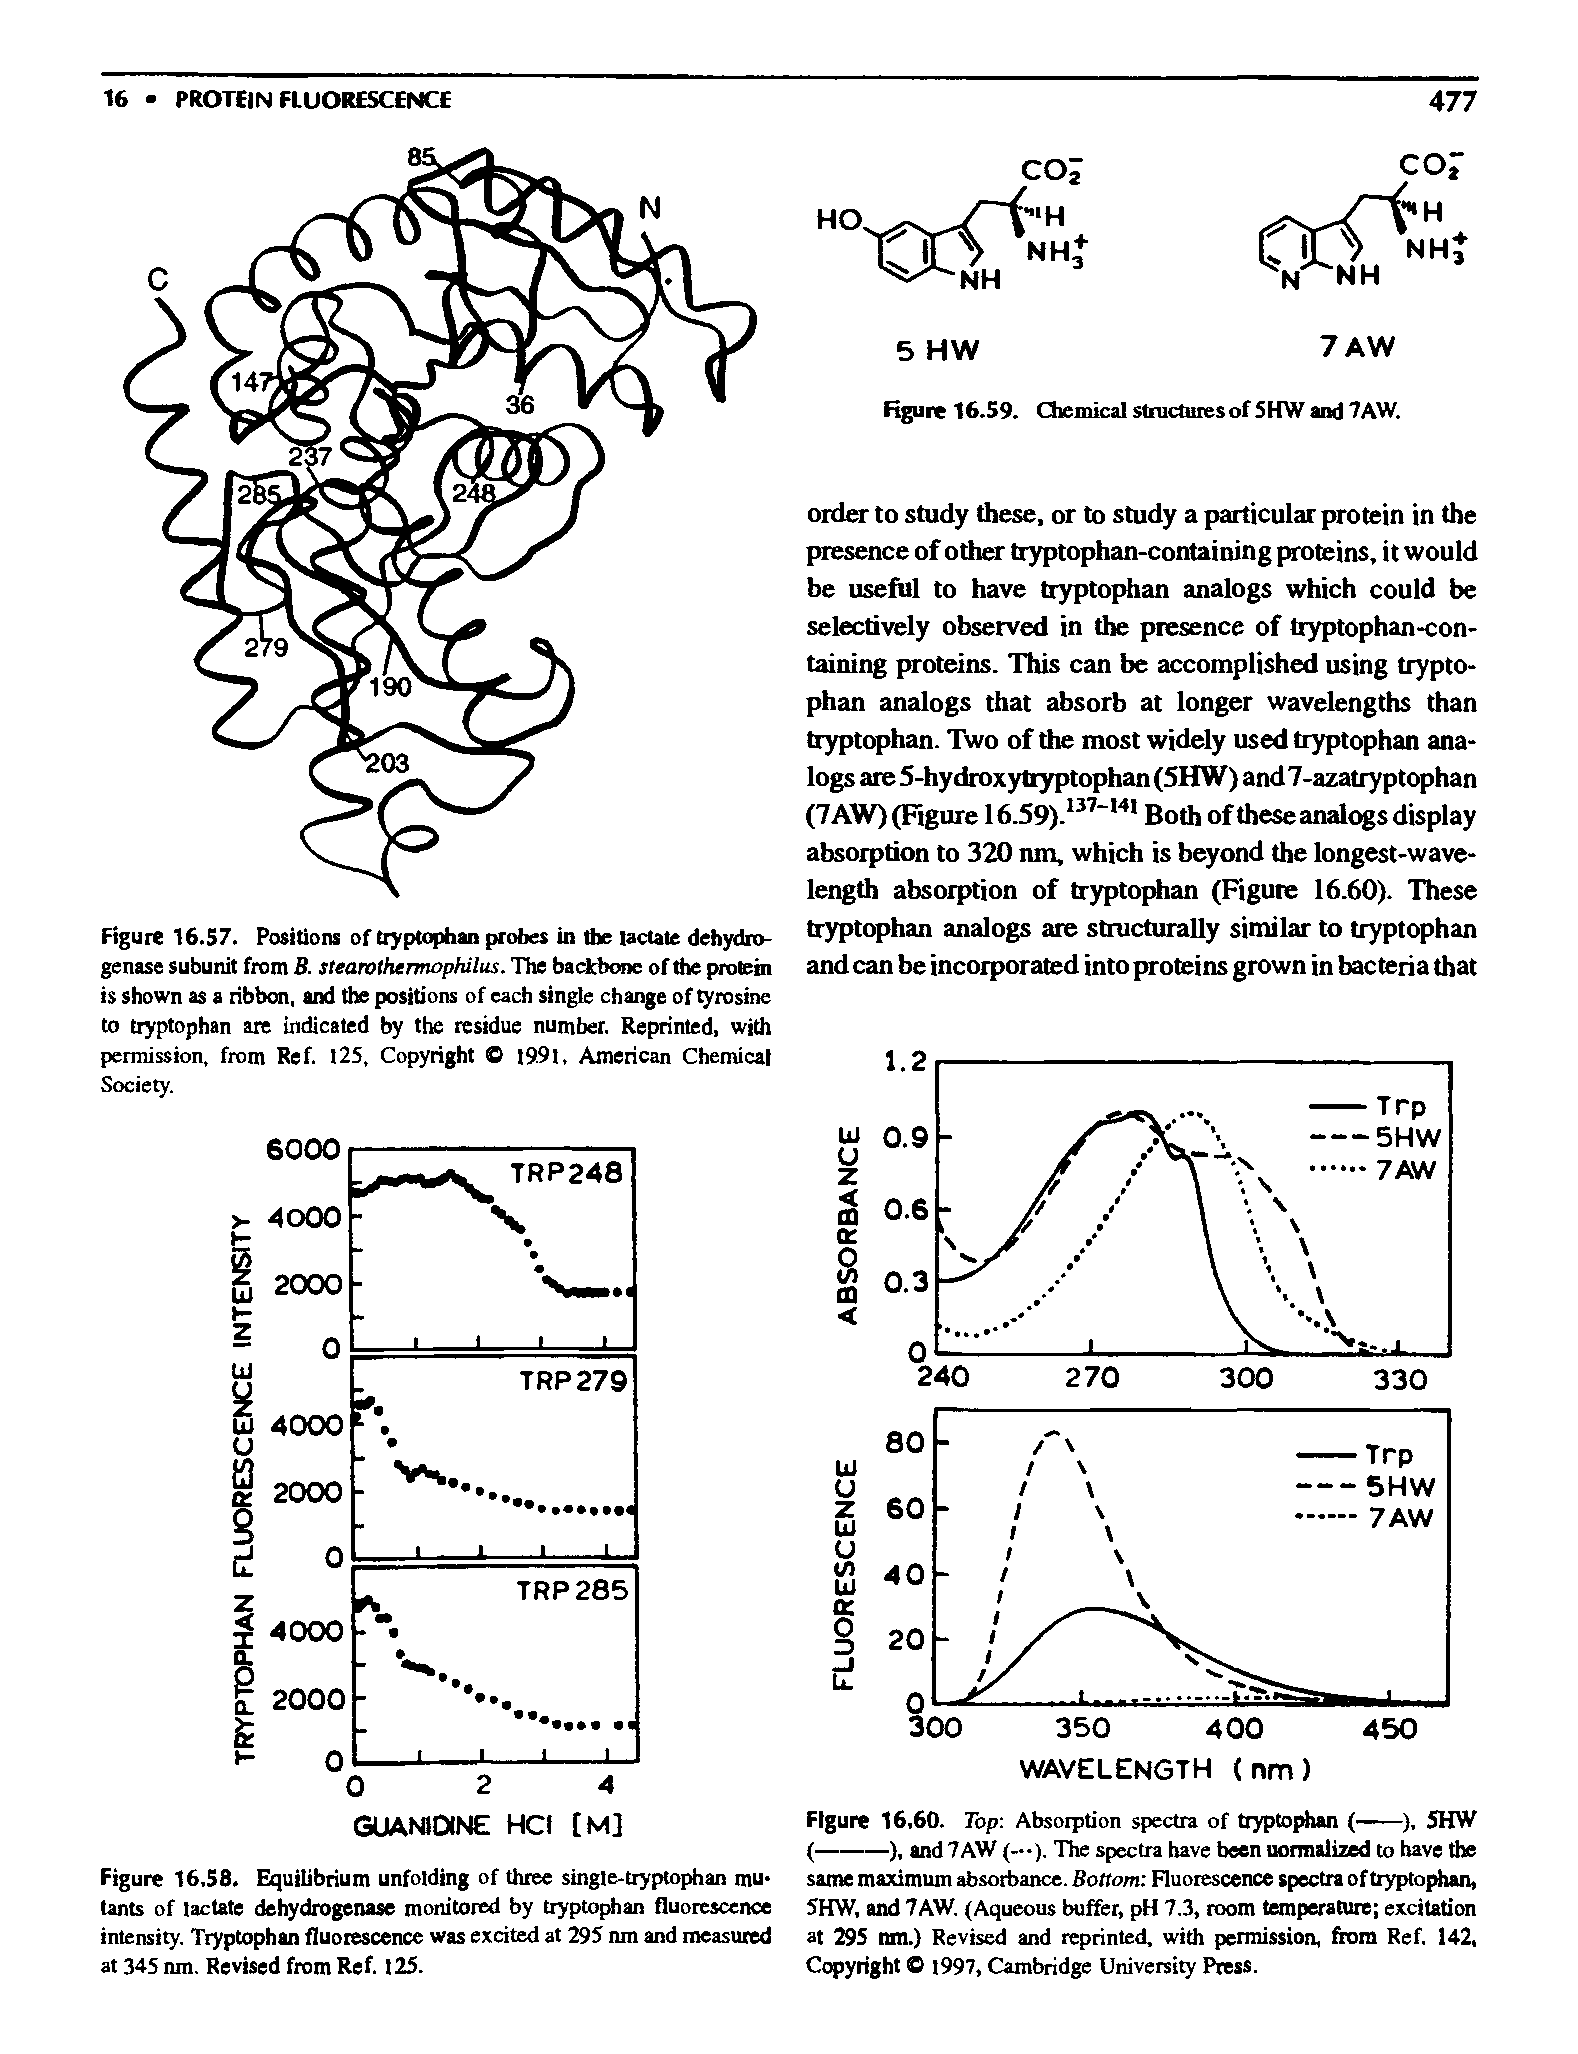 Figure 16.57. Positions of tryptophan probes in the lactate dehydrogenase subunit from B. stearothermophilus. The badcbone of the protein is shown as a ribbon, and the positions of each single change of rosine to tryptophan are indicated by the residue number. Reprinted, permission, from Ref. I25, Copyright O t9l9t. American Chemical Socie. ...